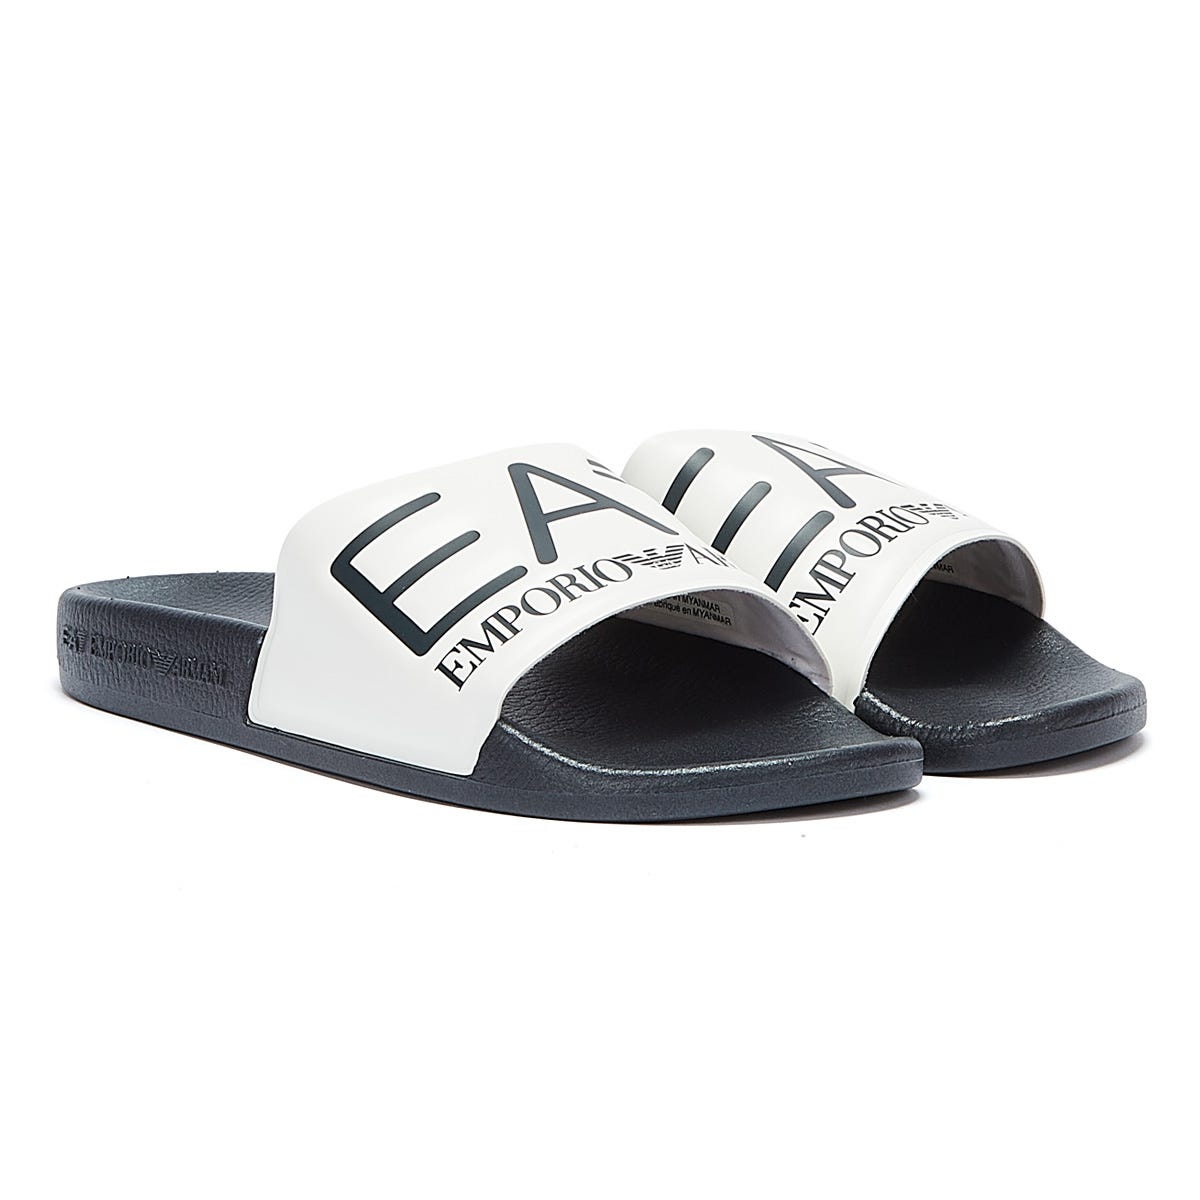 Emporio Armani | Eagle Sliders | Pool Shoes | House of Fraser